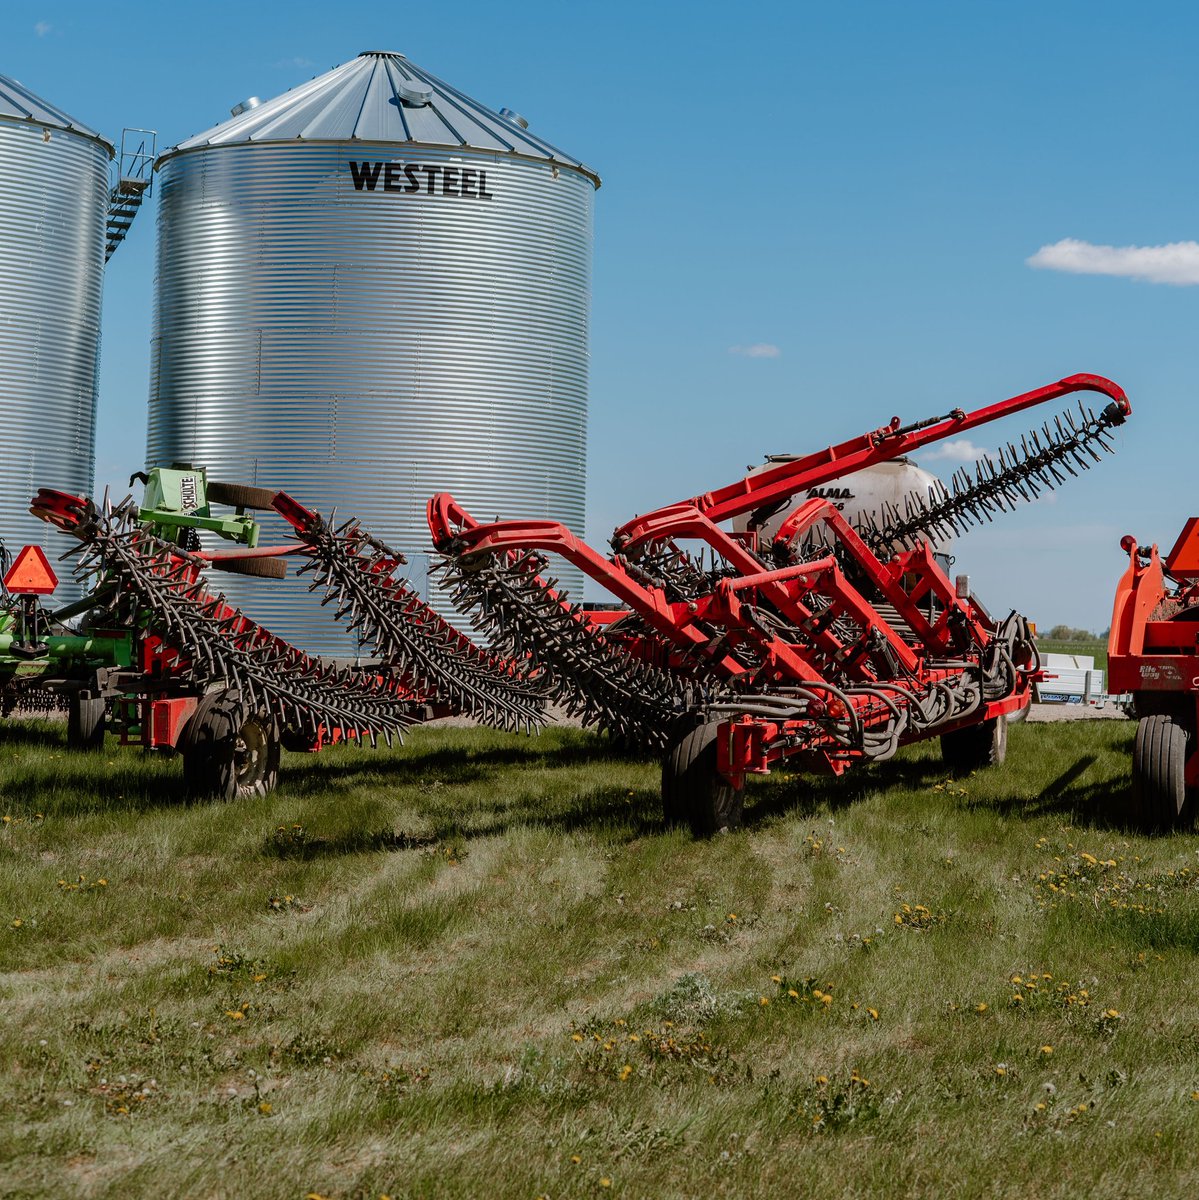 Wet ground that needs to get planted? The @RiteWayMfgCo Rotary Harrows are great help to dry land out. We have the 45' & 60' Rotary Harrows available for rent. Call or msg 204-825-0170 to book. #cdnag #mbag #agrental #equipmentrental #flamanrentals #westcdnag #rotaryharrow